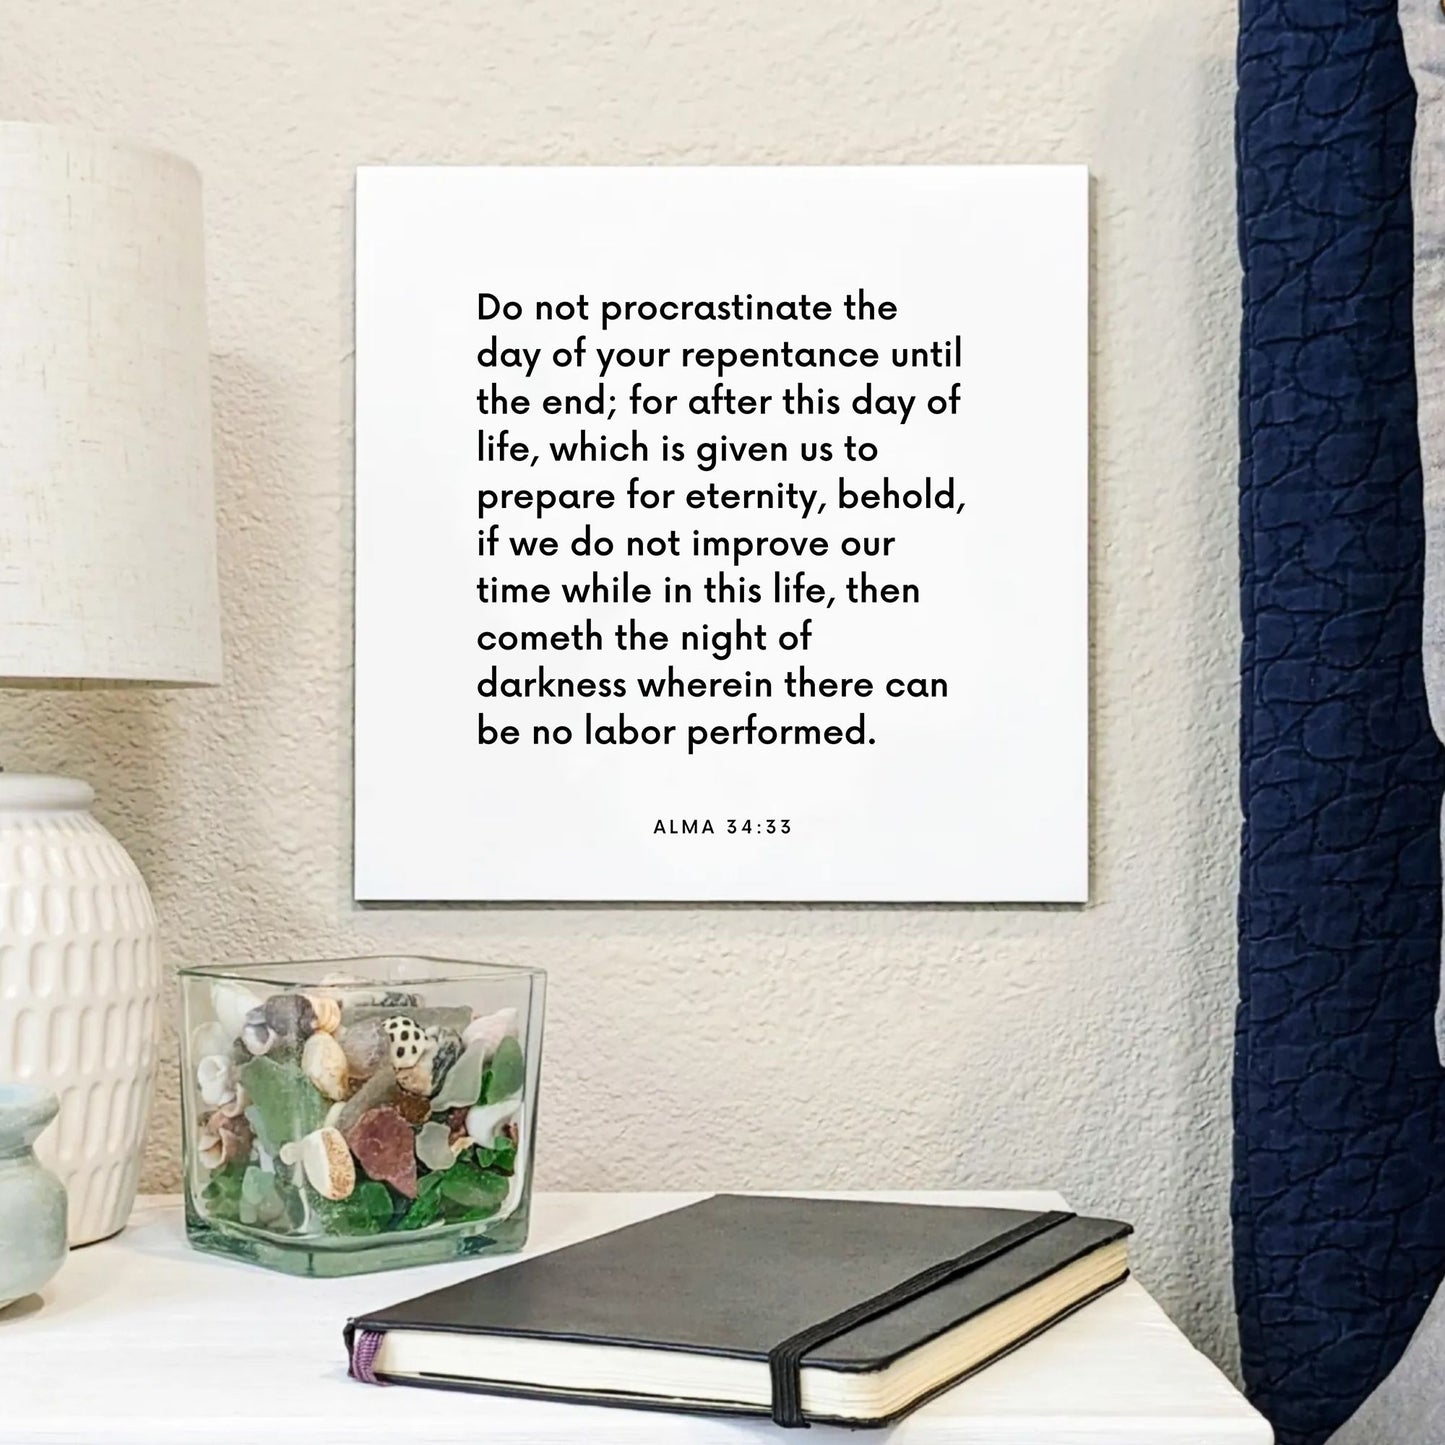 Bedside mouting of the scripture tile for Alma 34:33 - "Do not procrastinate the day of your repentance"